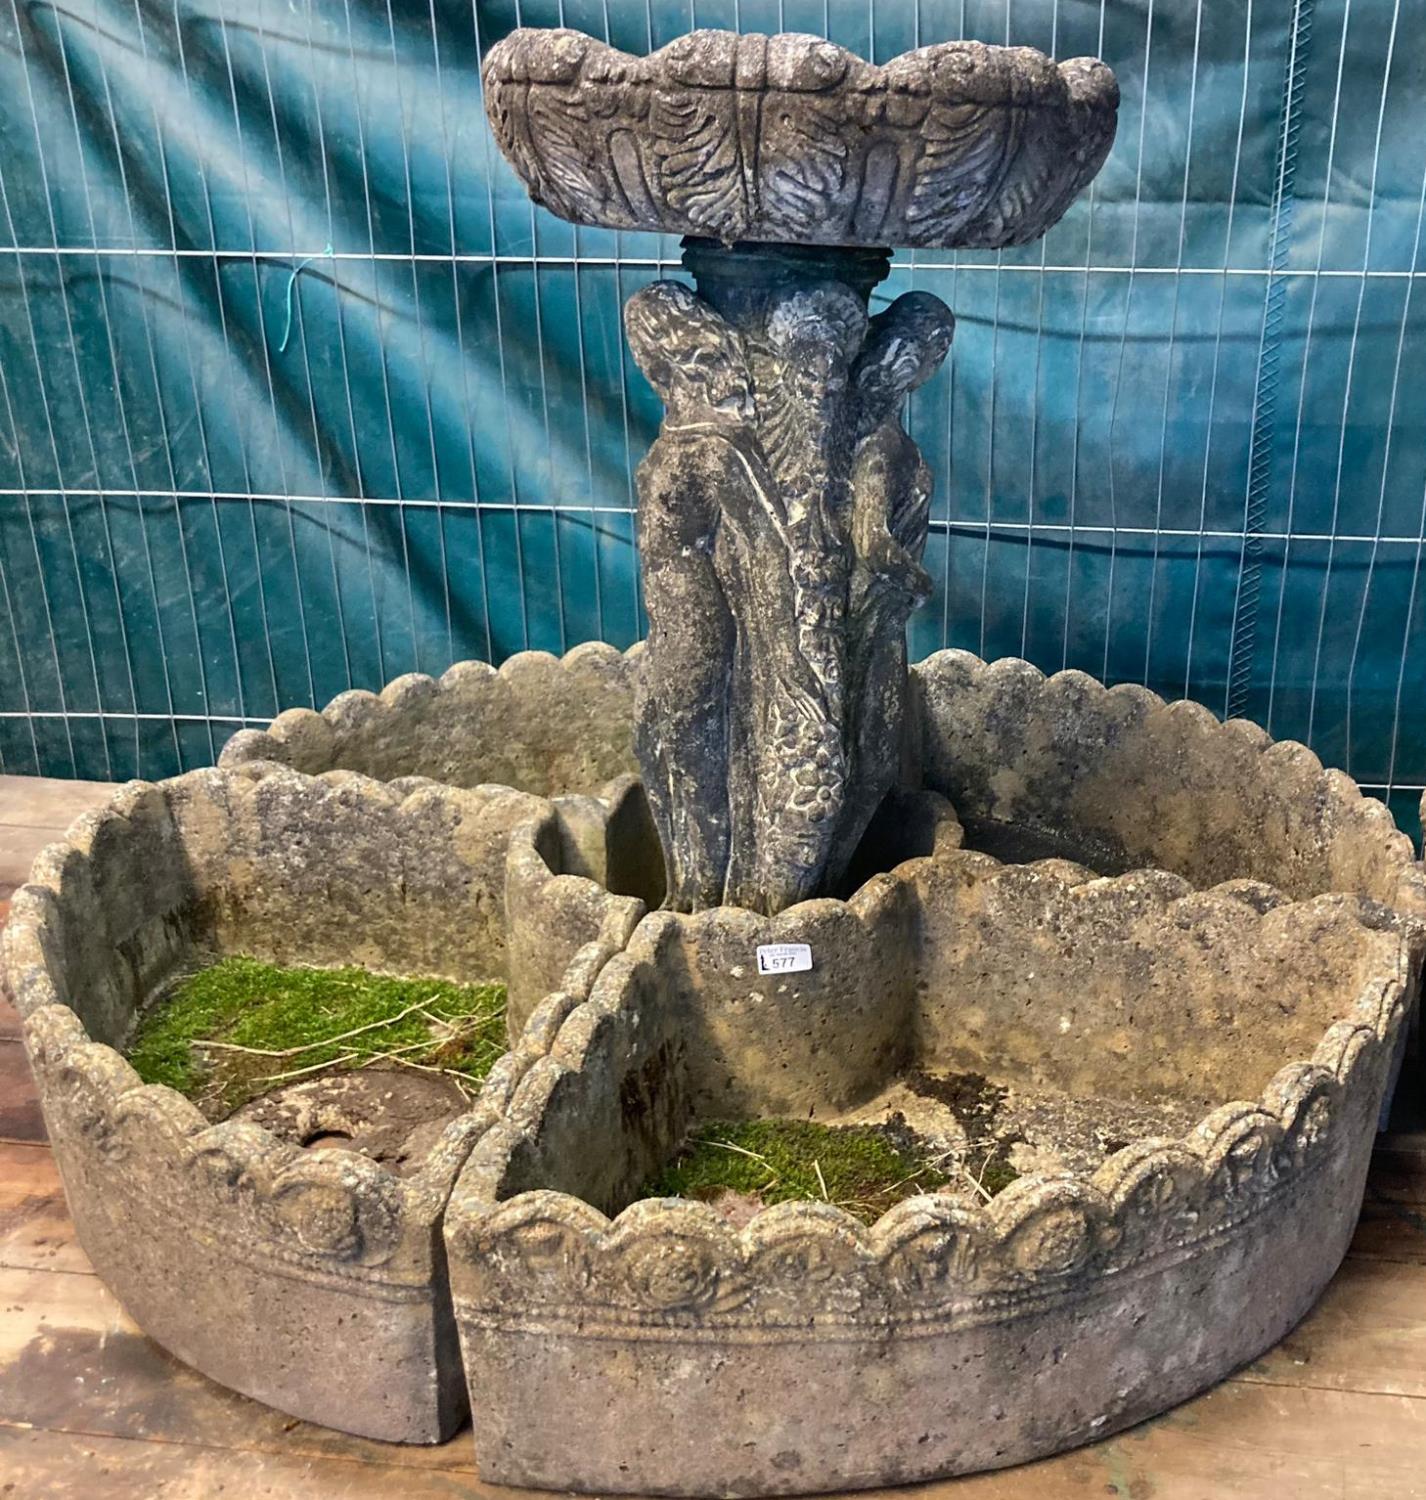 Reconstituted stone garden bird bath with figural pedestal and segmented planters around the base.